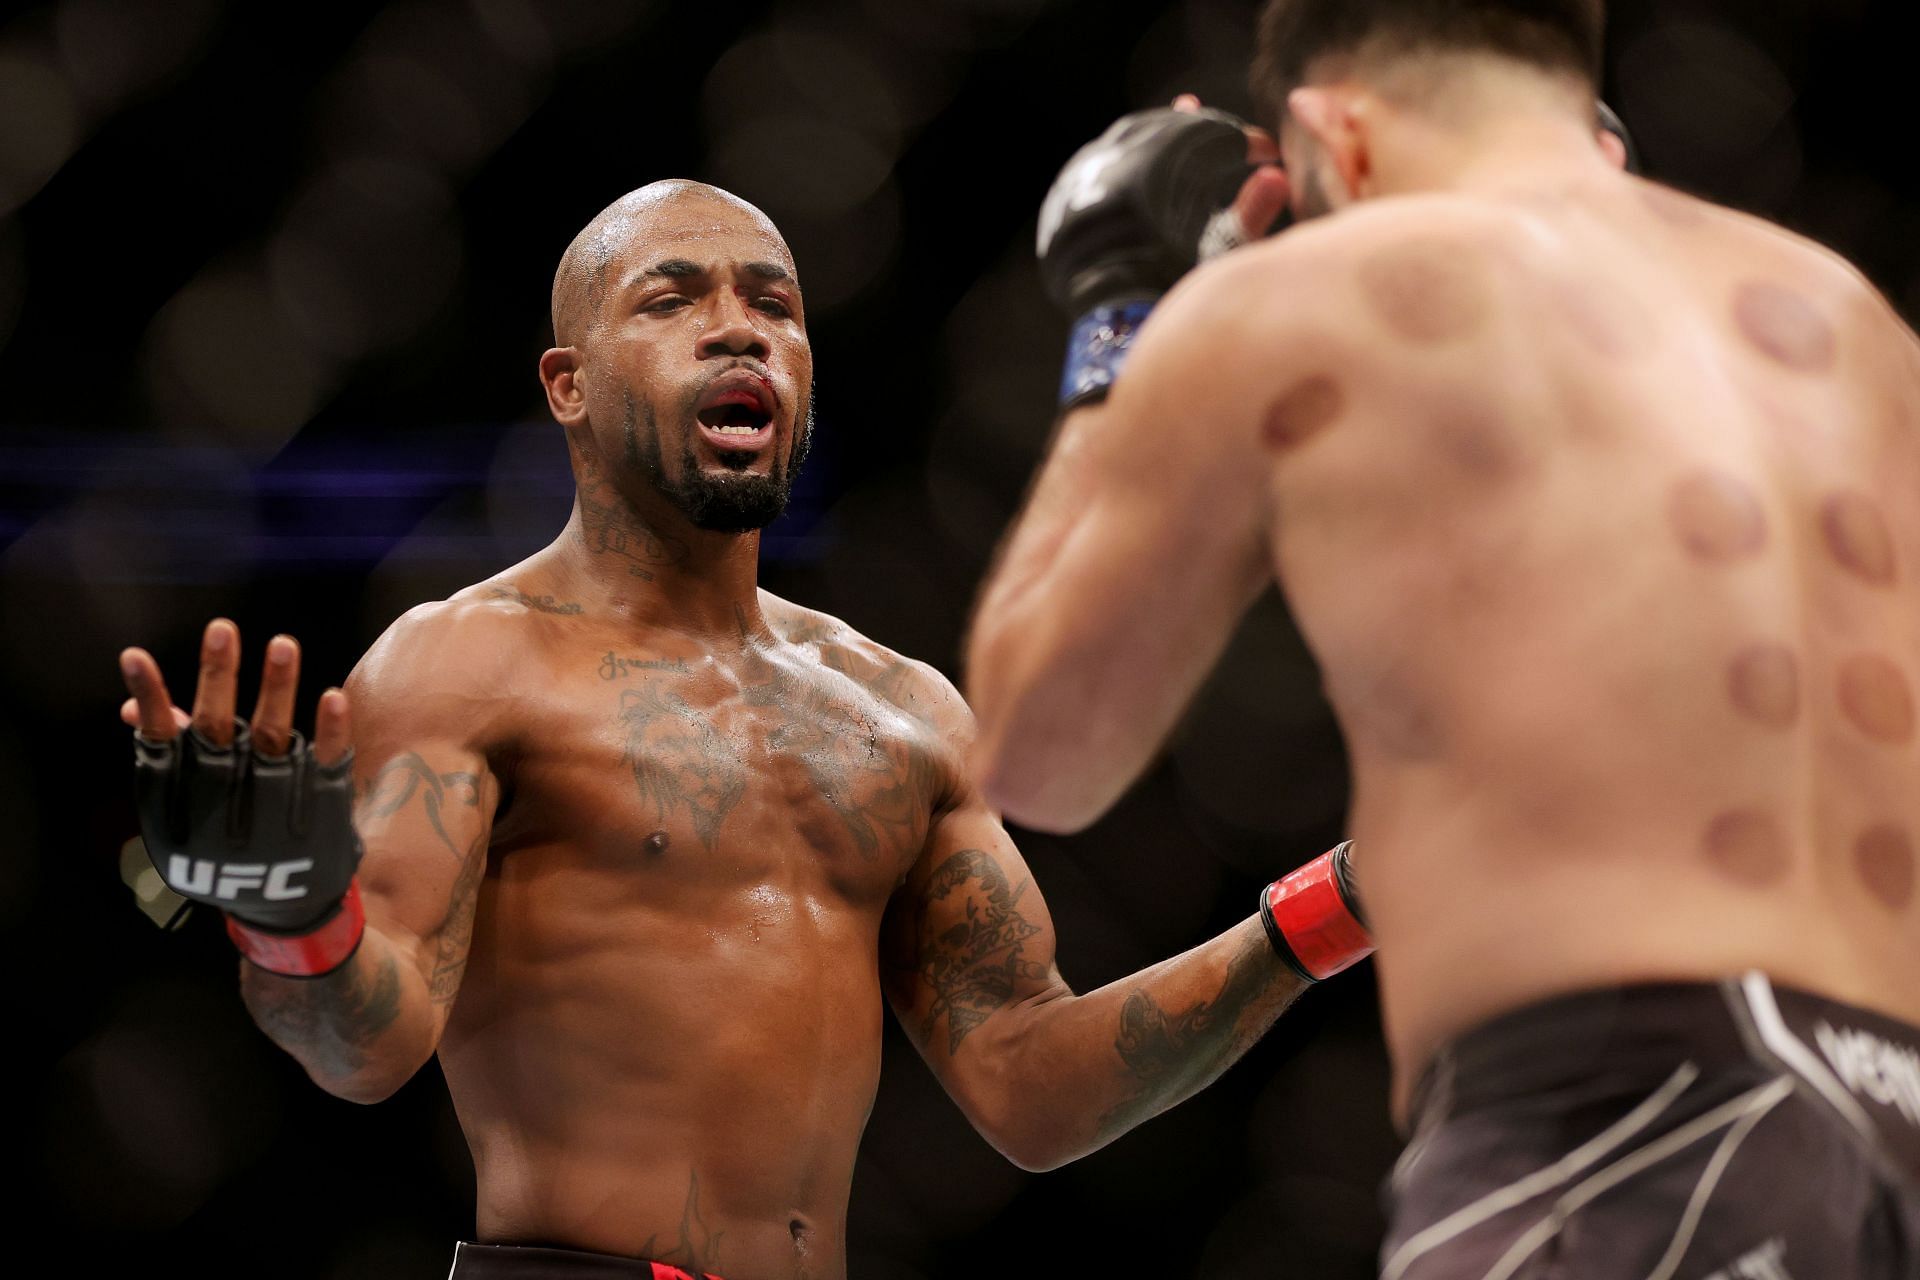 Can Bobby Green stun Islam Makhachev on late notice this weekend?